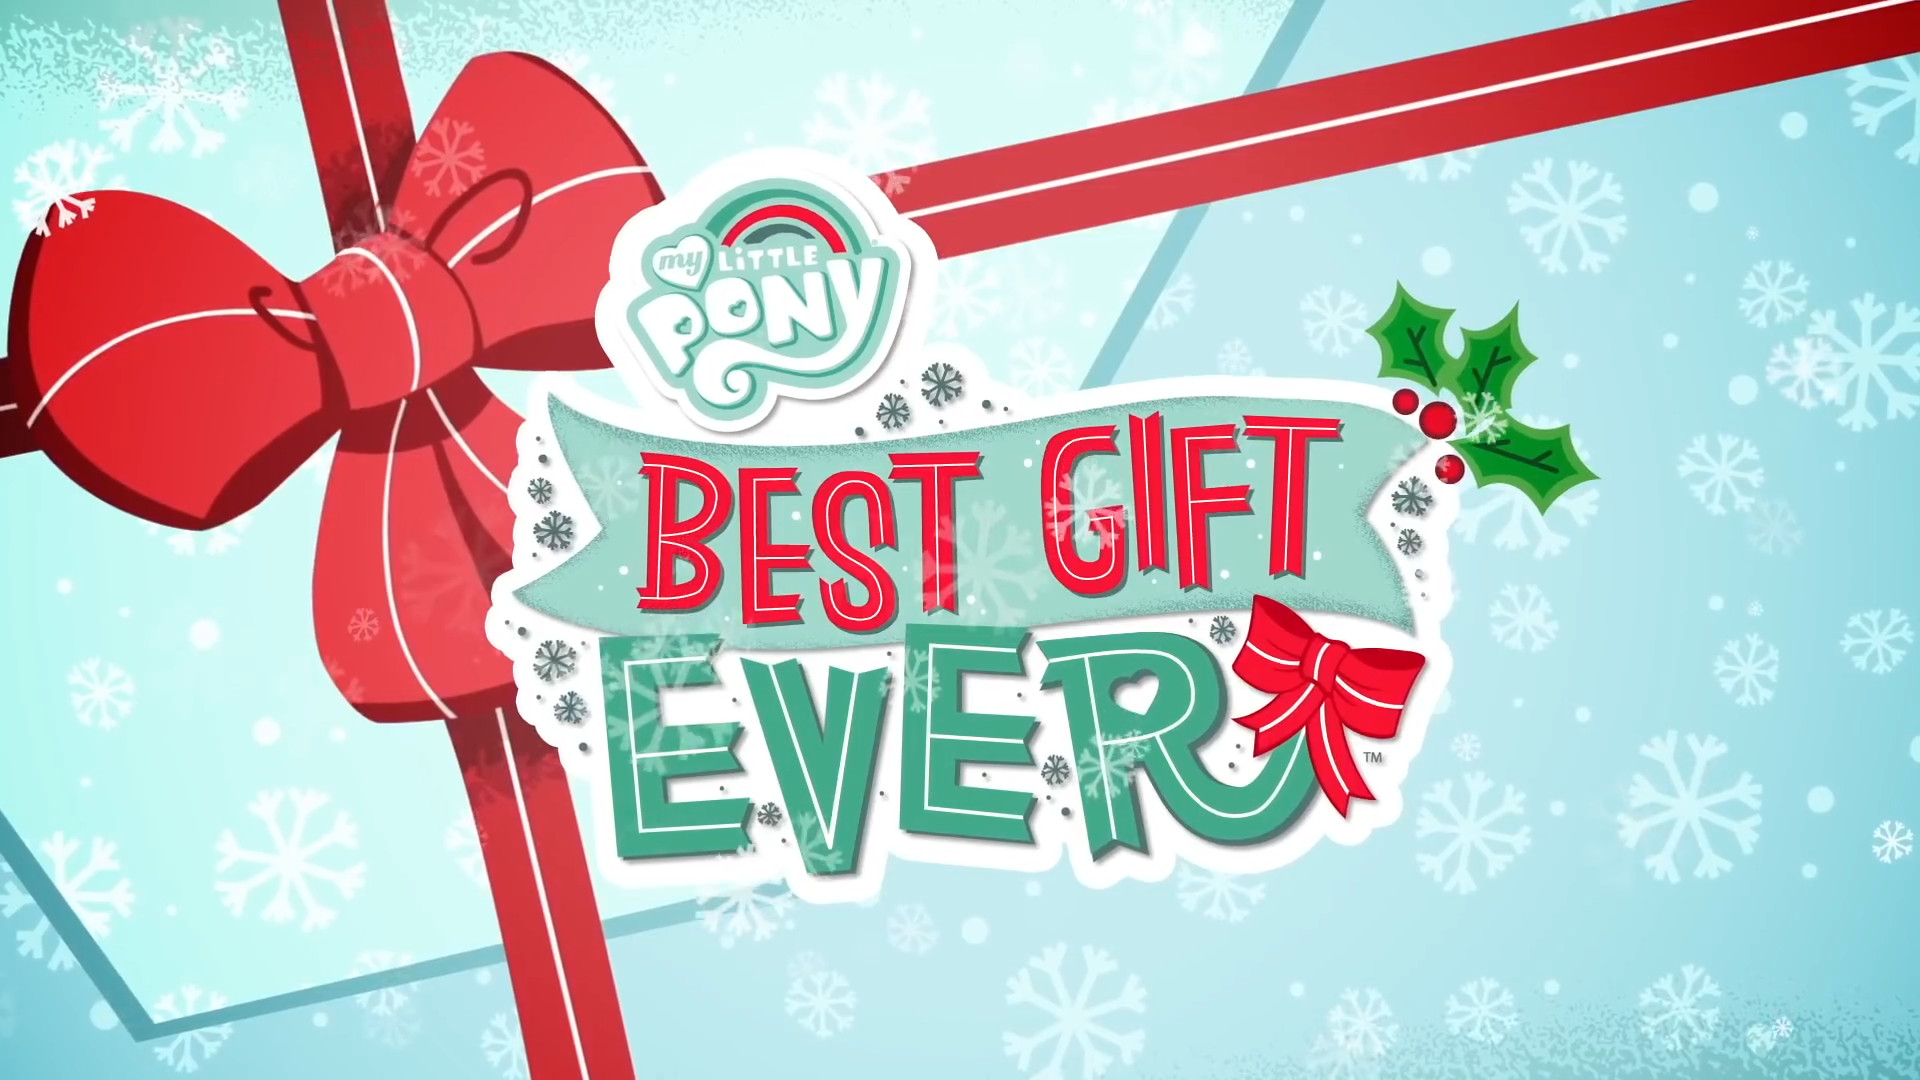 1920x1080 my LÄ°TTLE ON BEST GIFT TM text christmas font